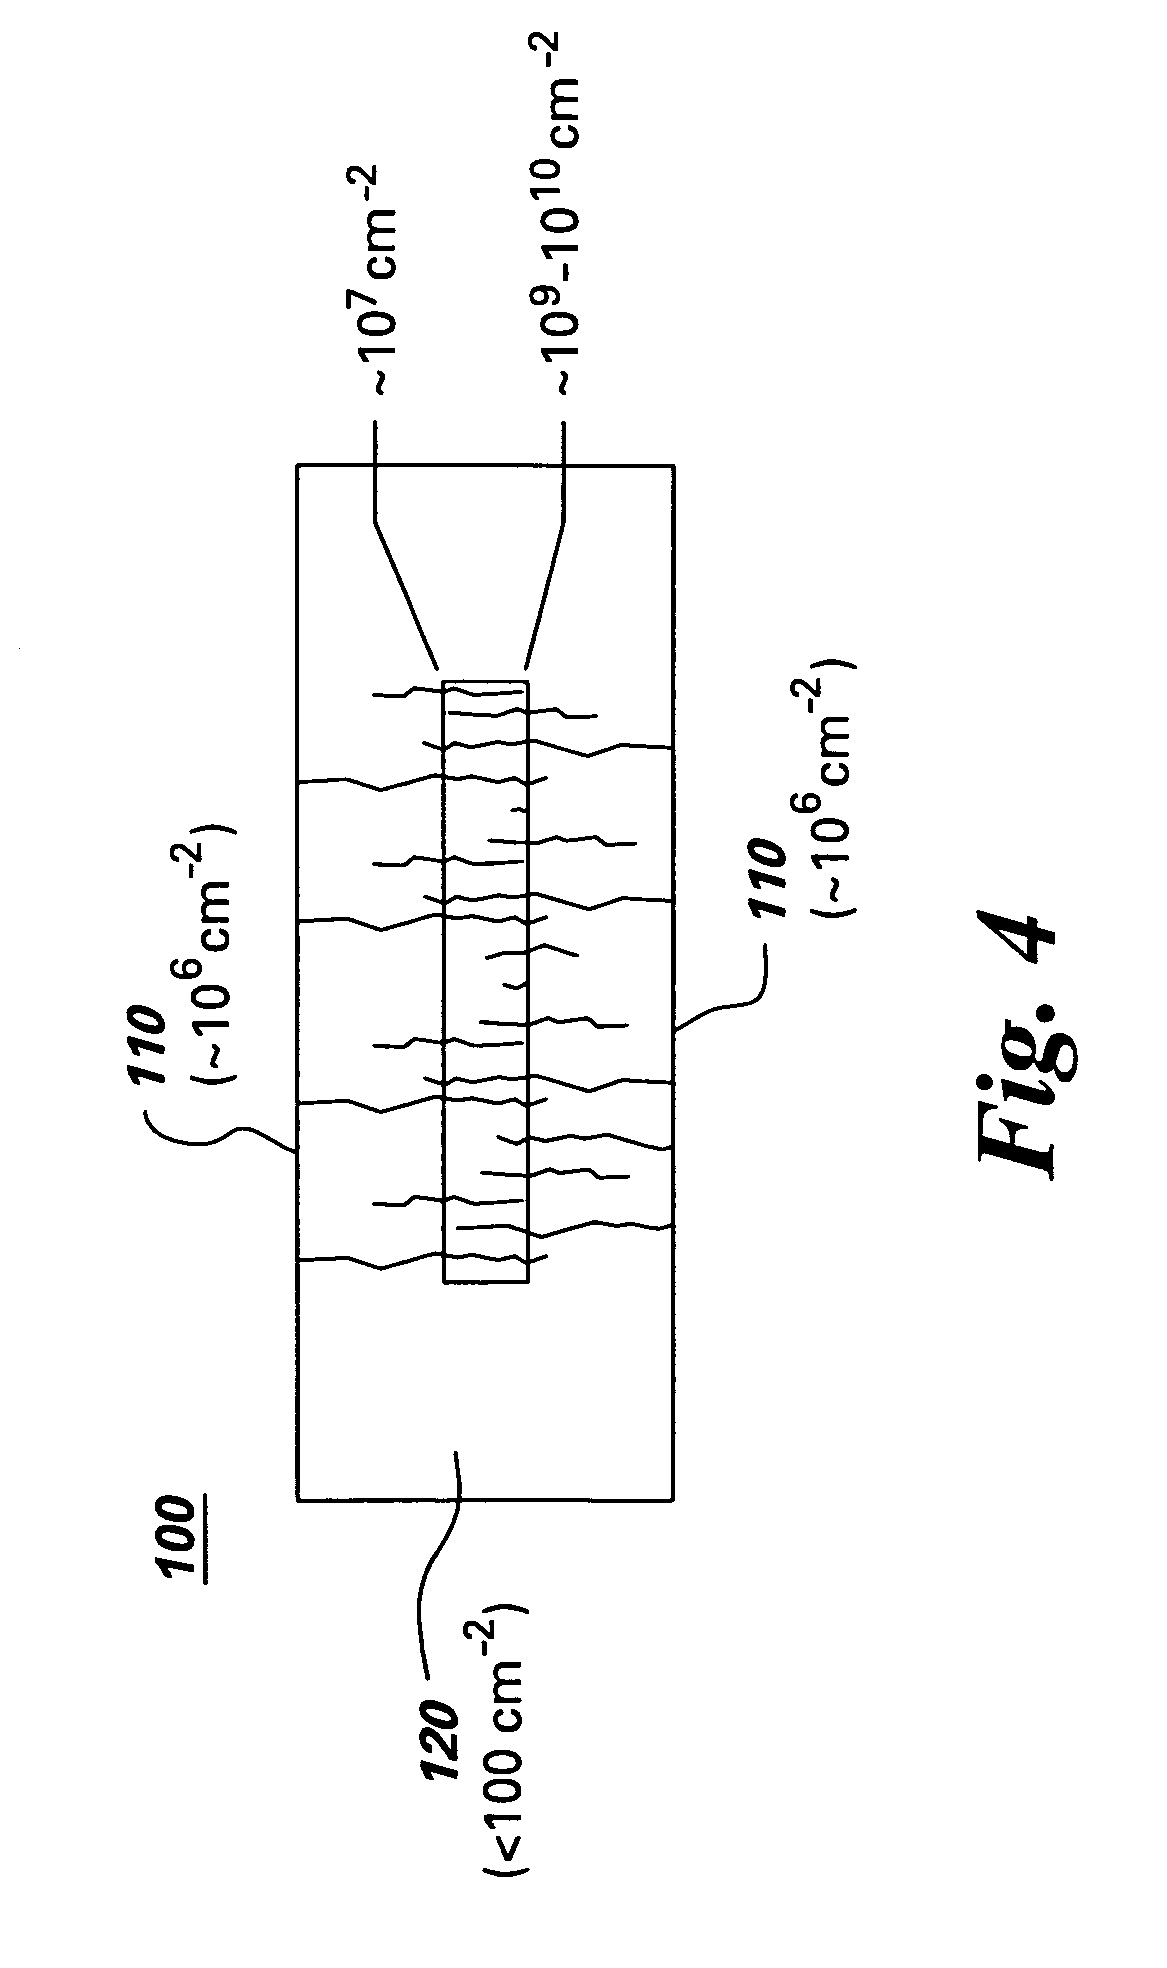 Homoepitaxial gallium-nitride-based light emitting device and method for producing